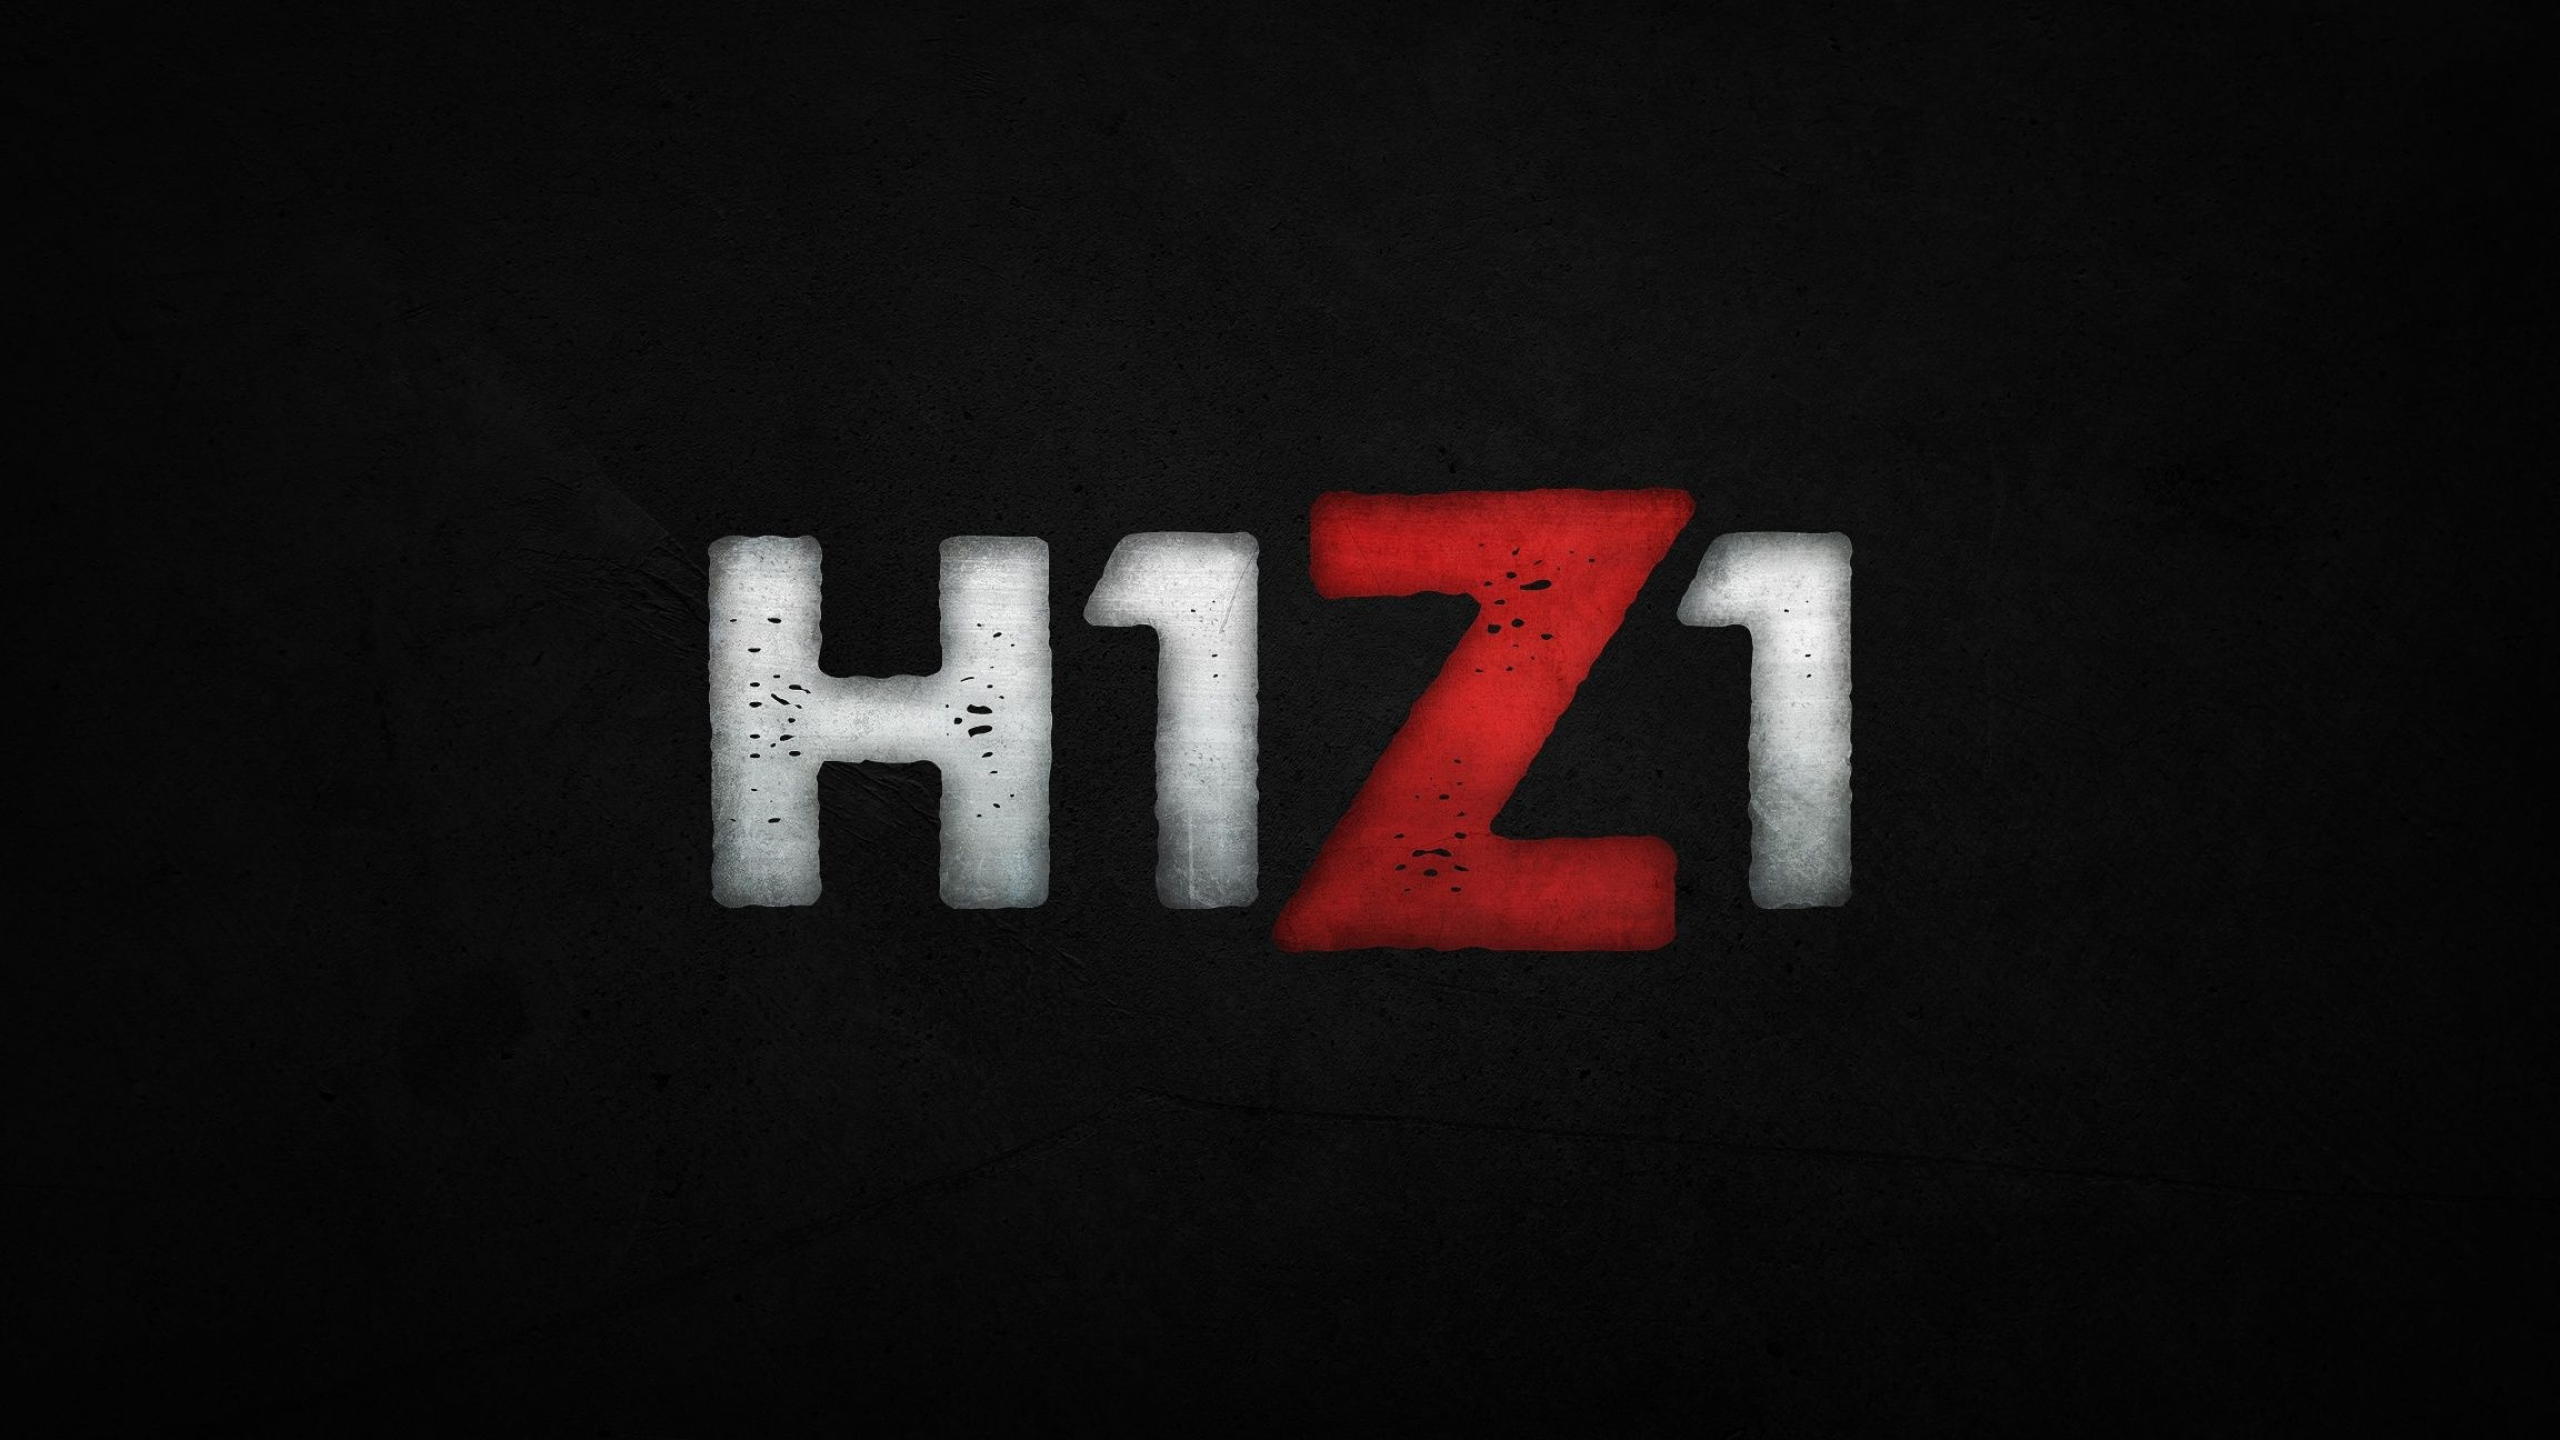 H1Z1 wallpapers, Gaming action, Top backgrounds, Competitive gaming, 2560x1440 HD Desktop